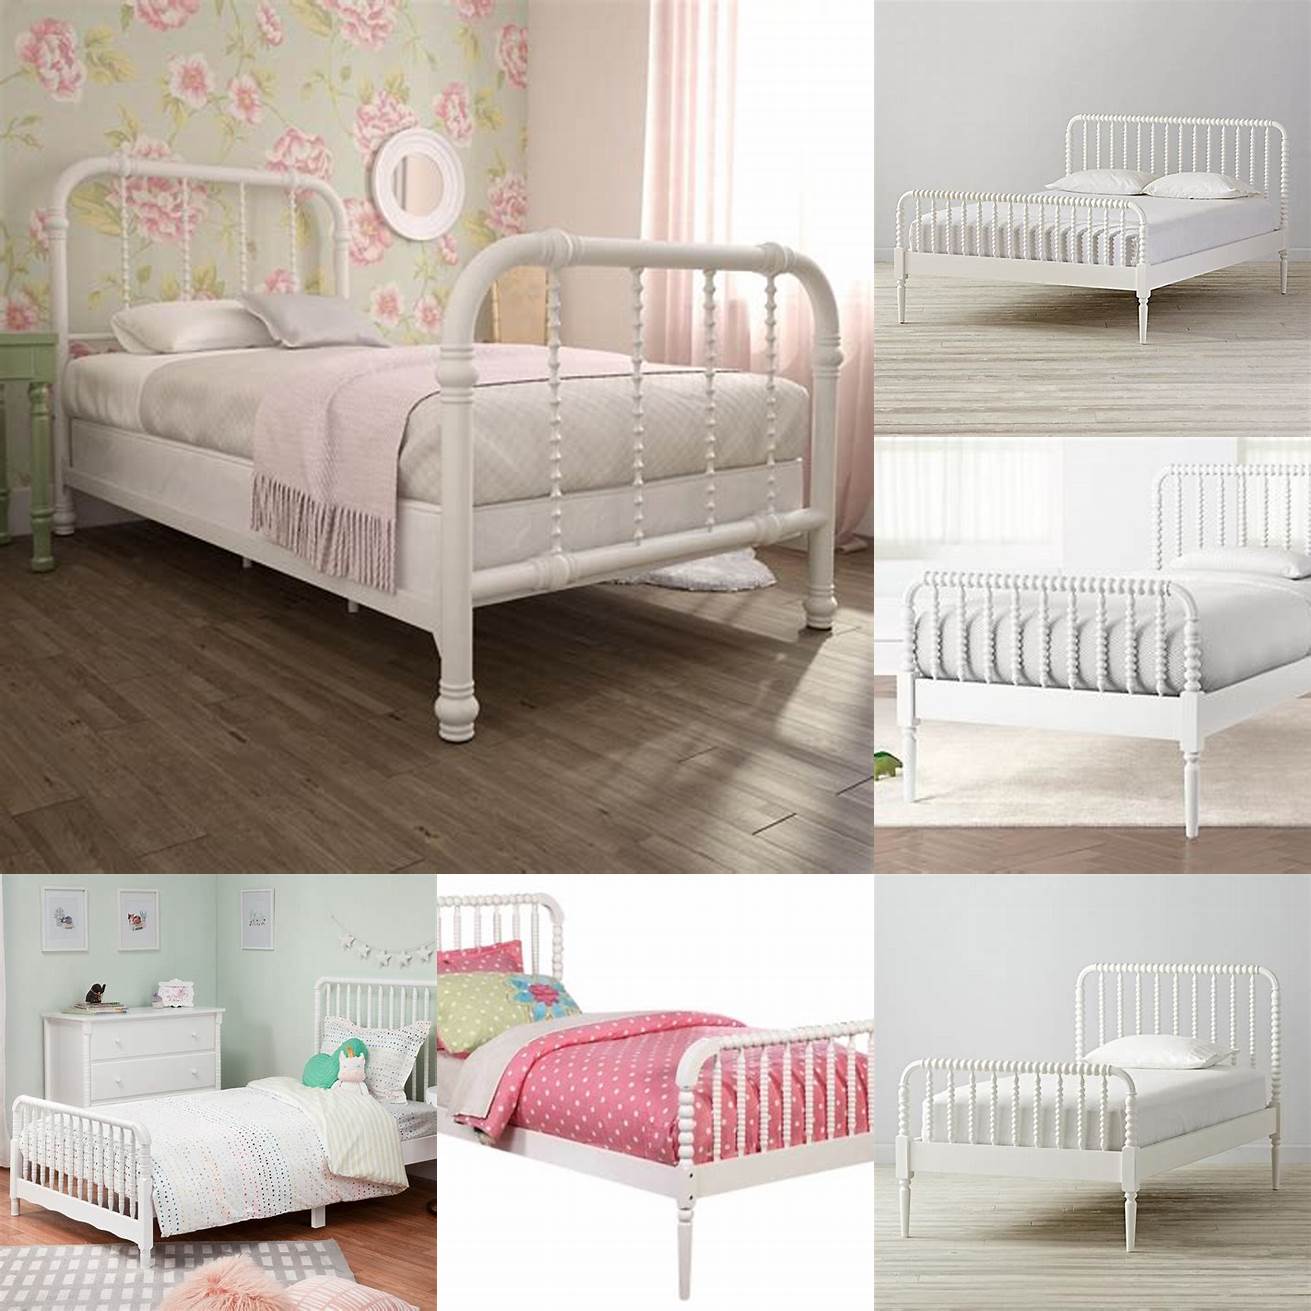 The white Jenny Lind bed is a classic choice that adds a touch of elegance to any bedroom